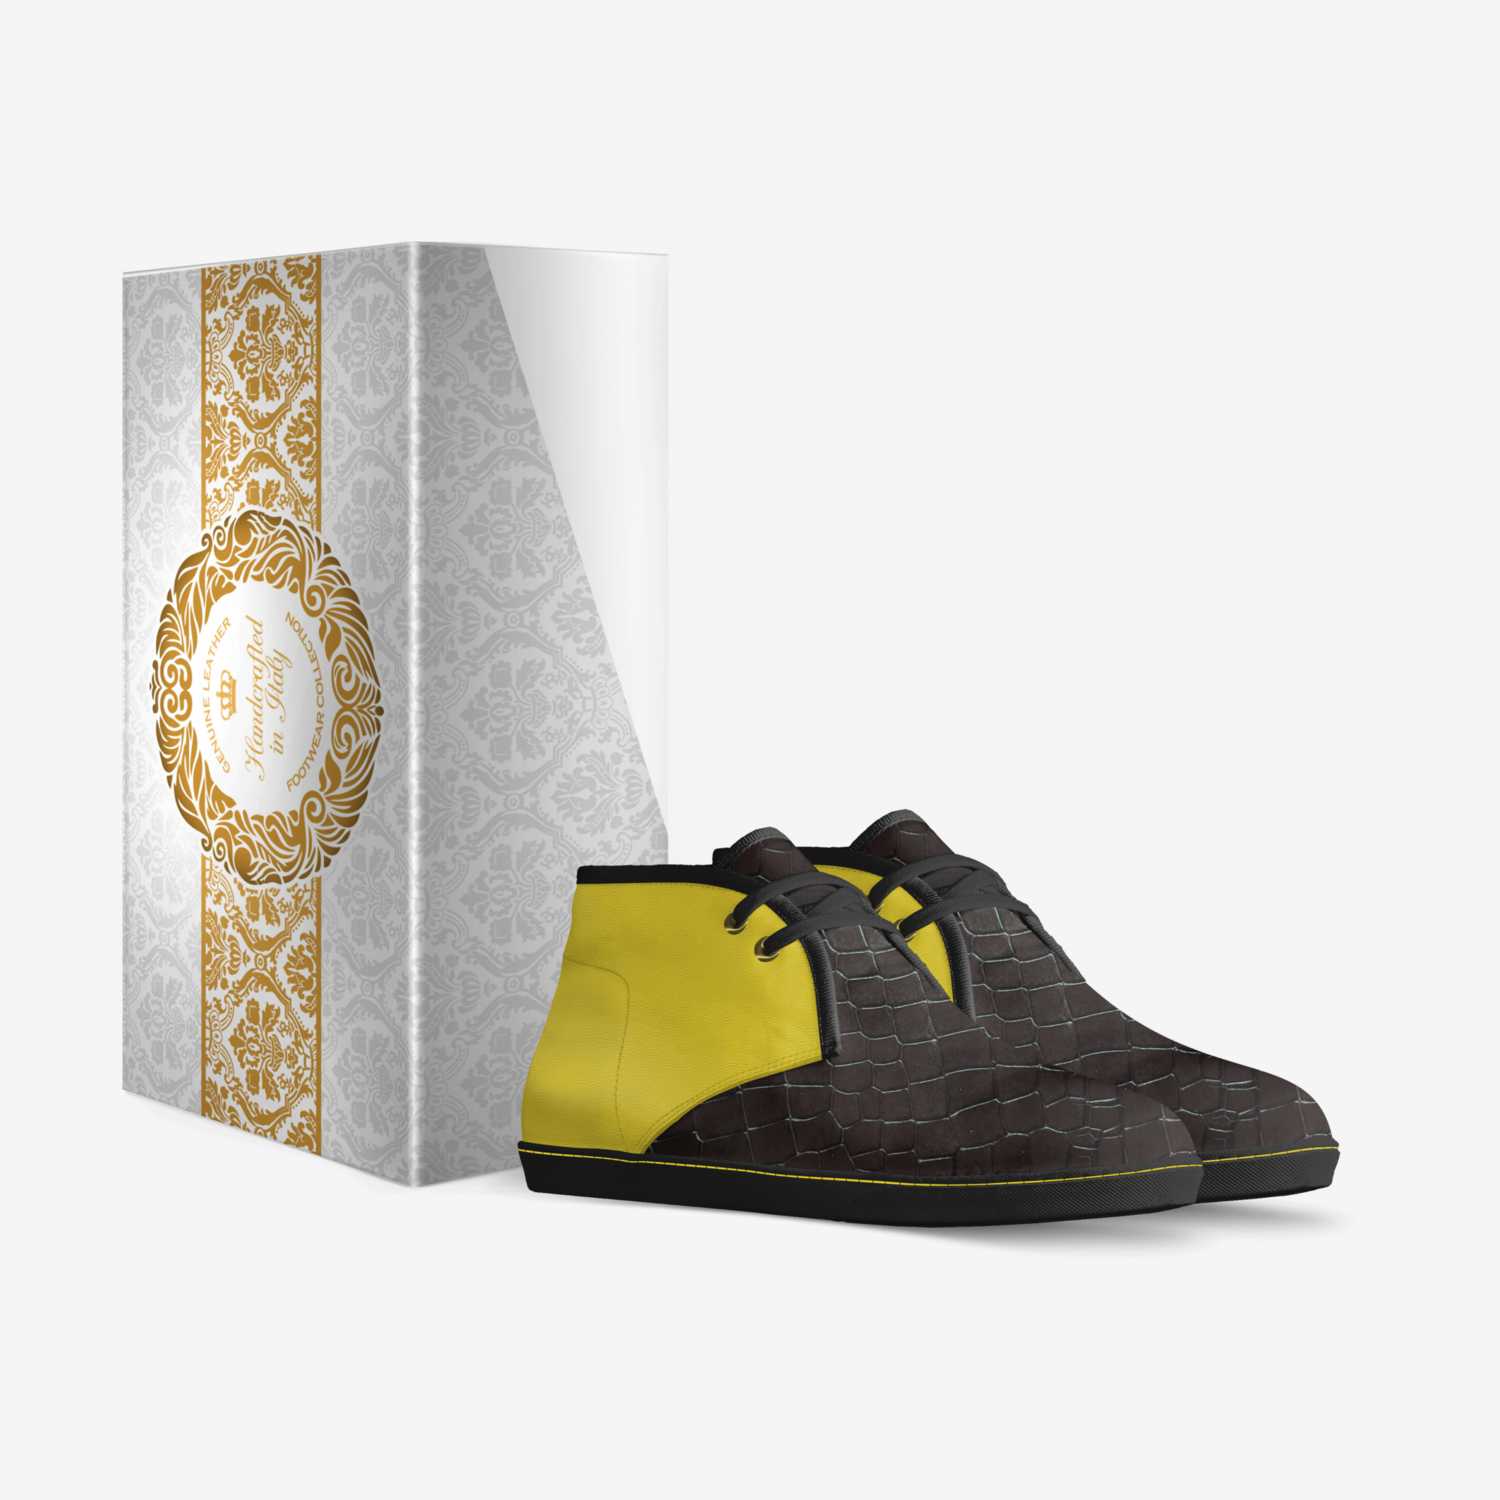 New Road ® HIPSTER custom made in Italy shoes by Paulina Jastrzebska | Box view